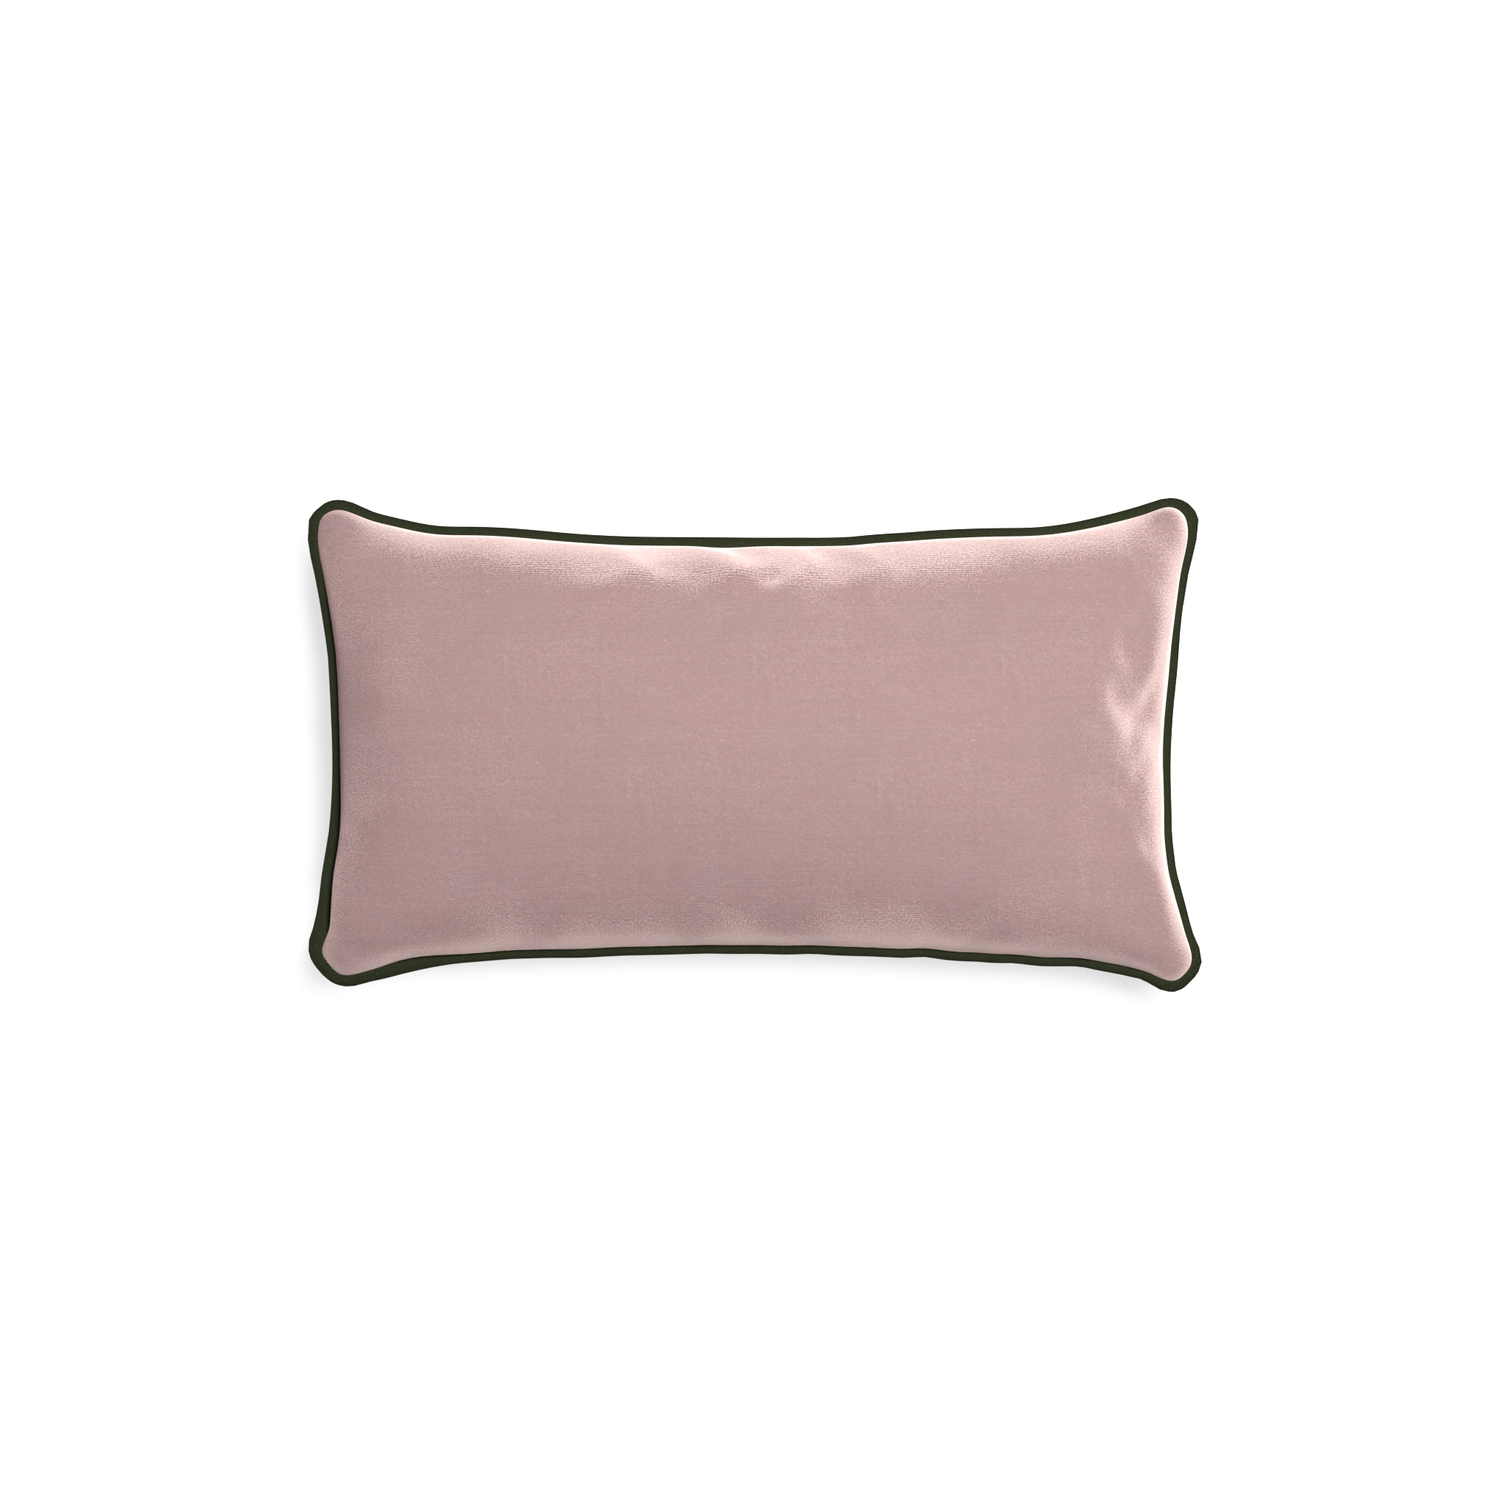 rectangle mauve velvet pillow with fern green piping